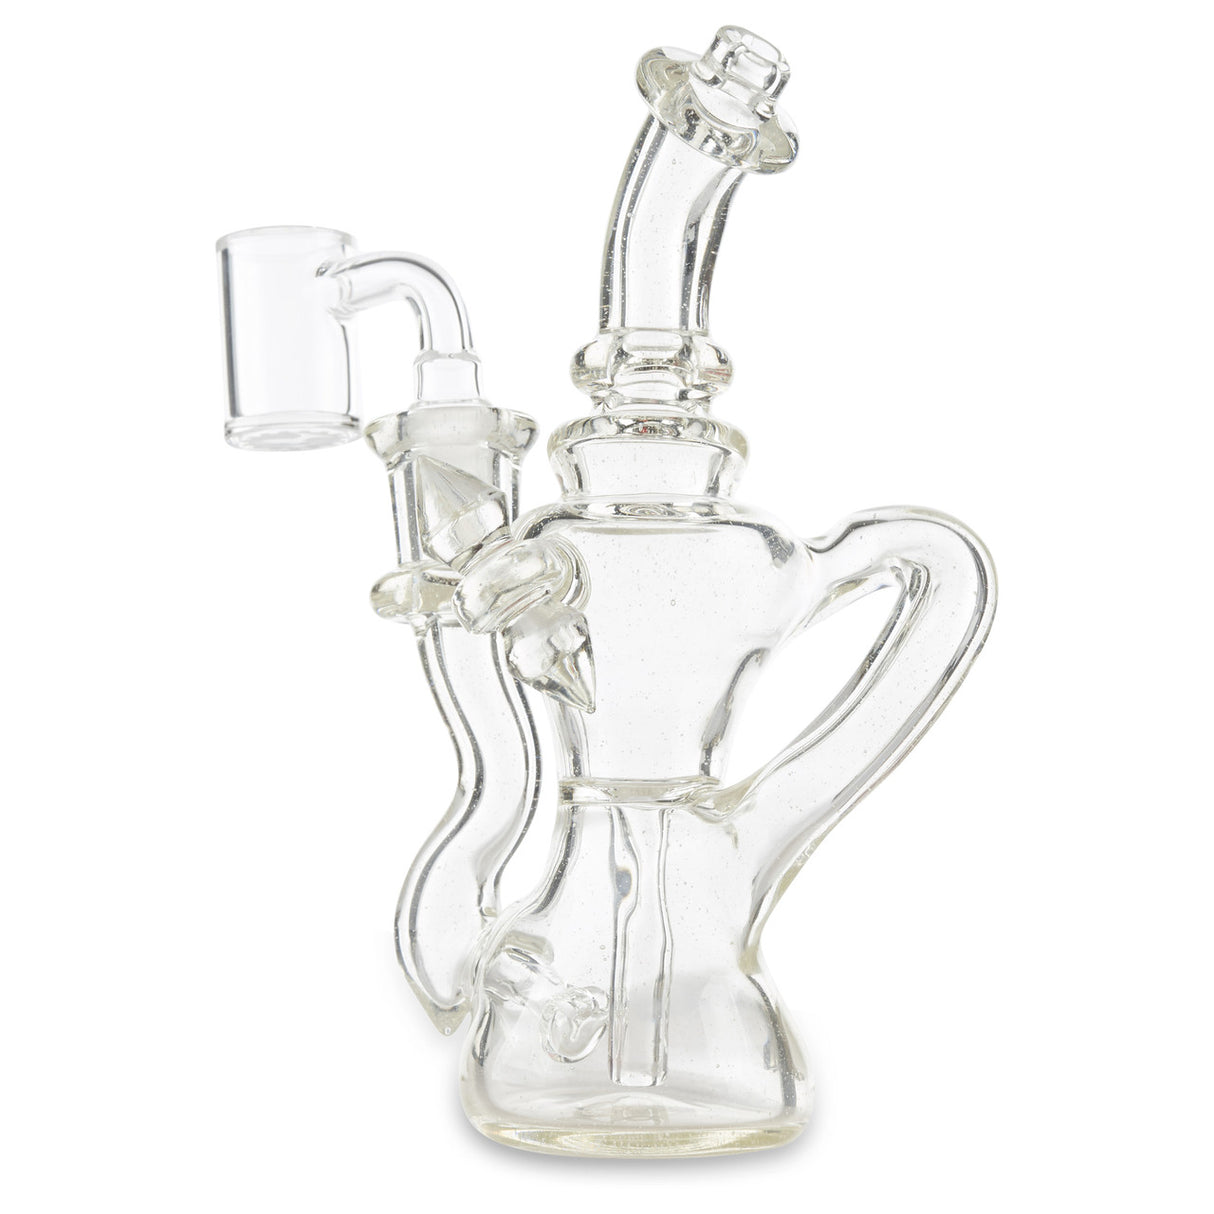 huffy glass single uptake recycler color changing glass rig for wax and oils